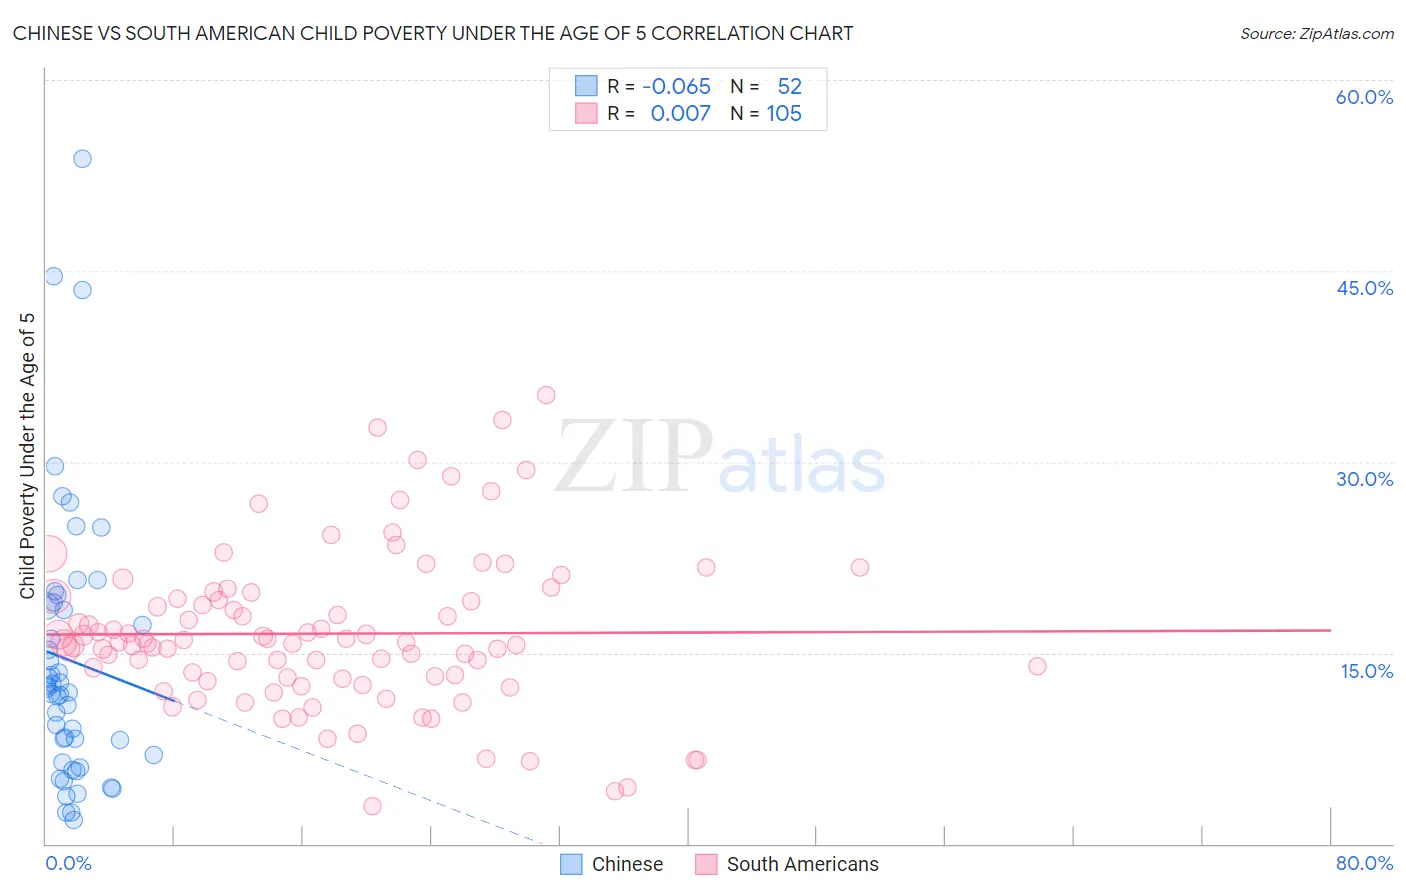 Chinese vs South American Child Poverty Under the Age of 5